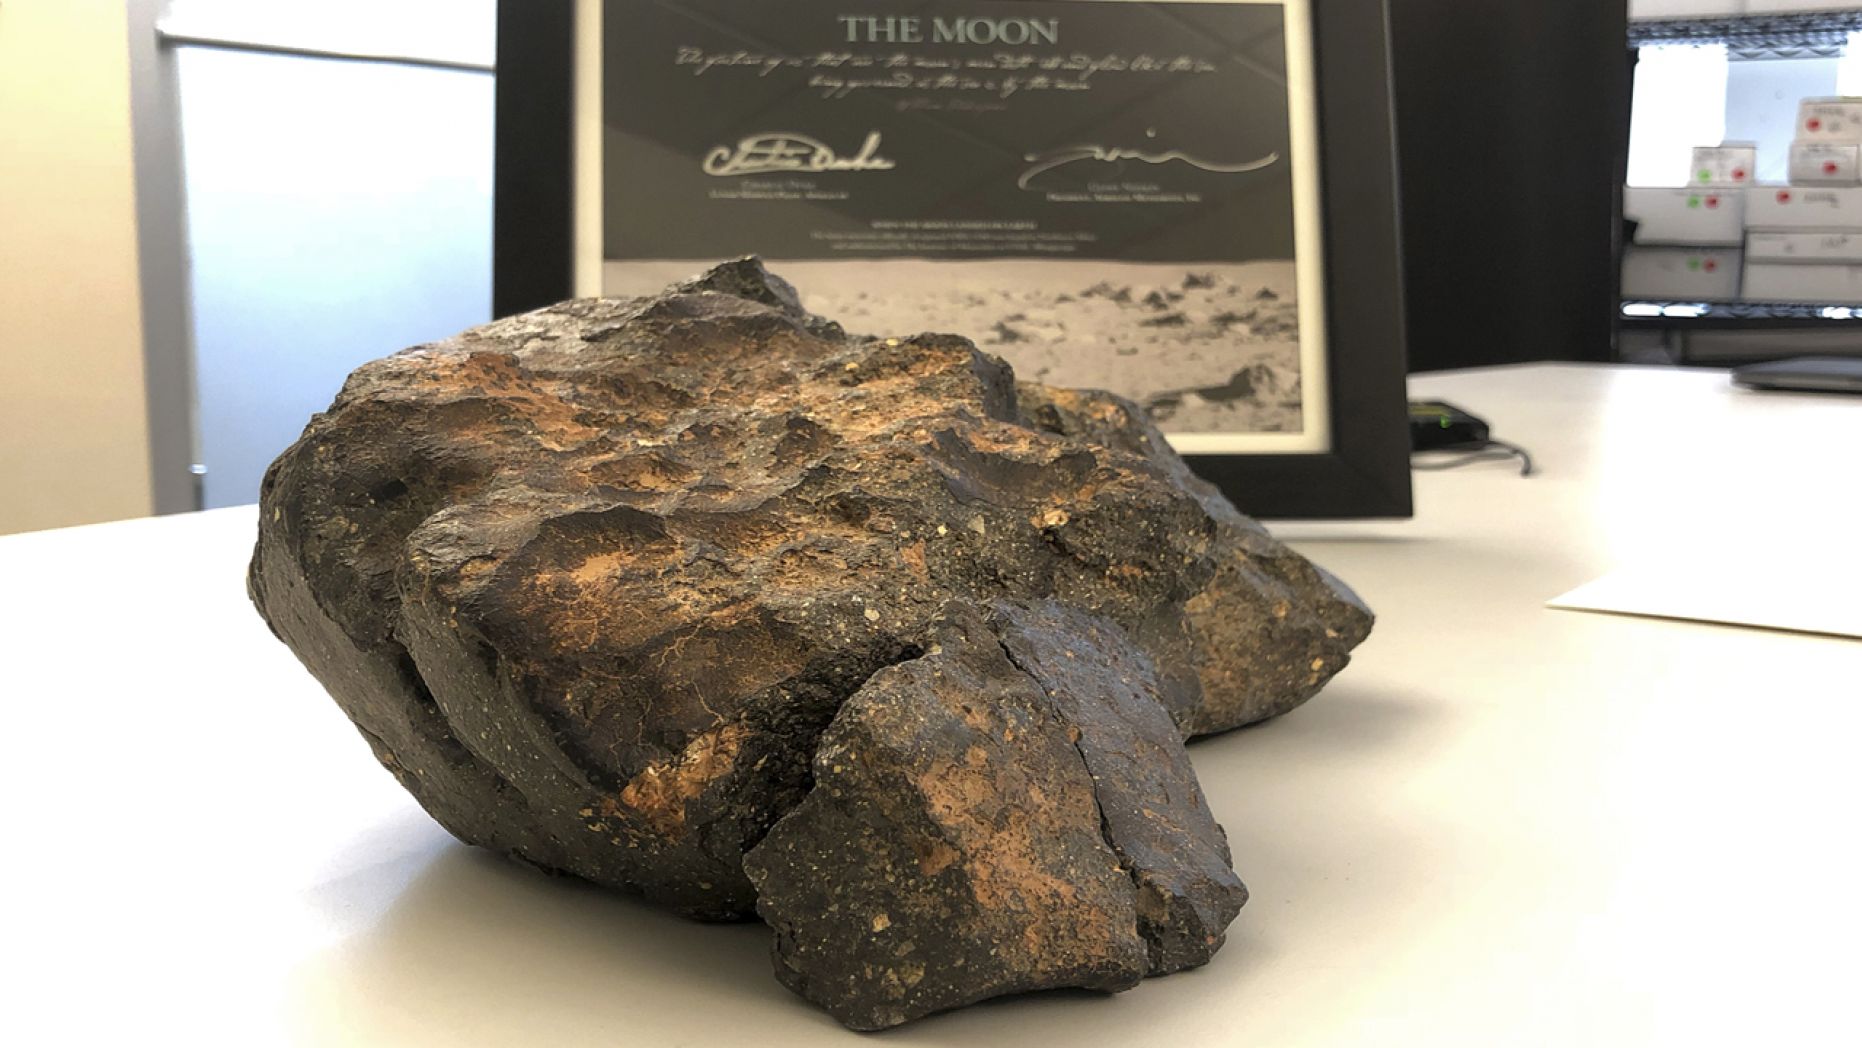 Rock blasted from moon for sale on Earth